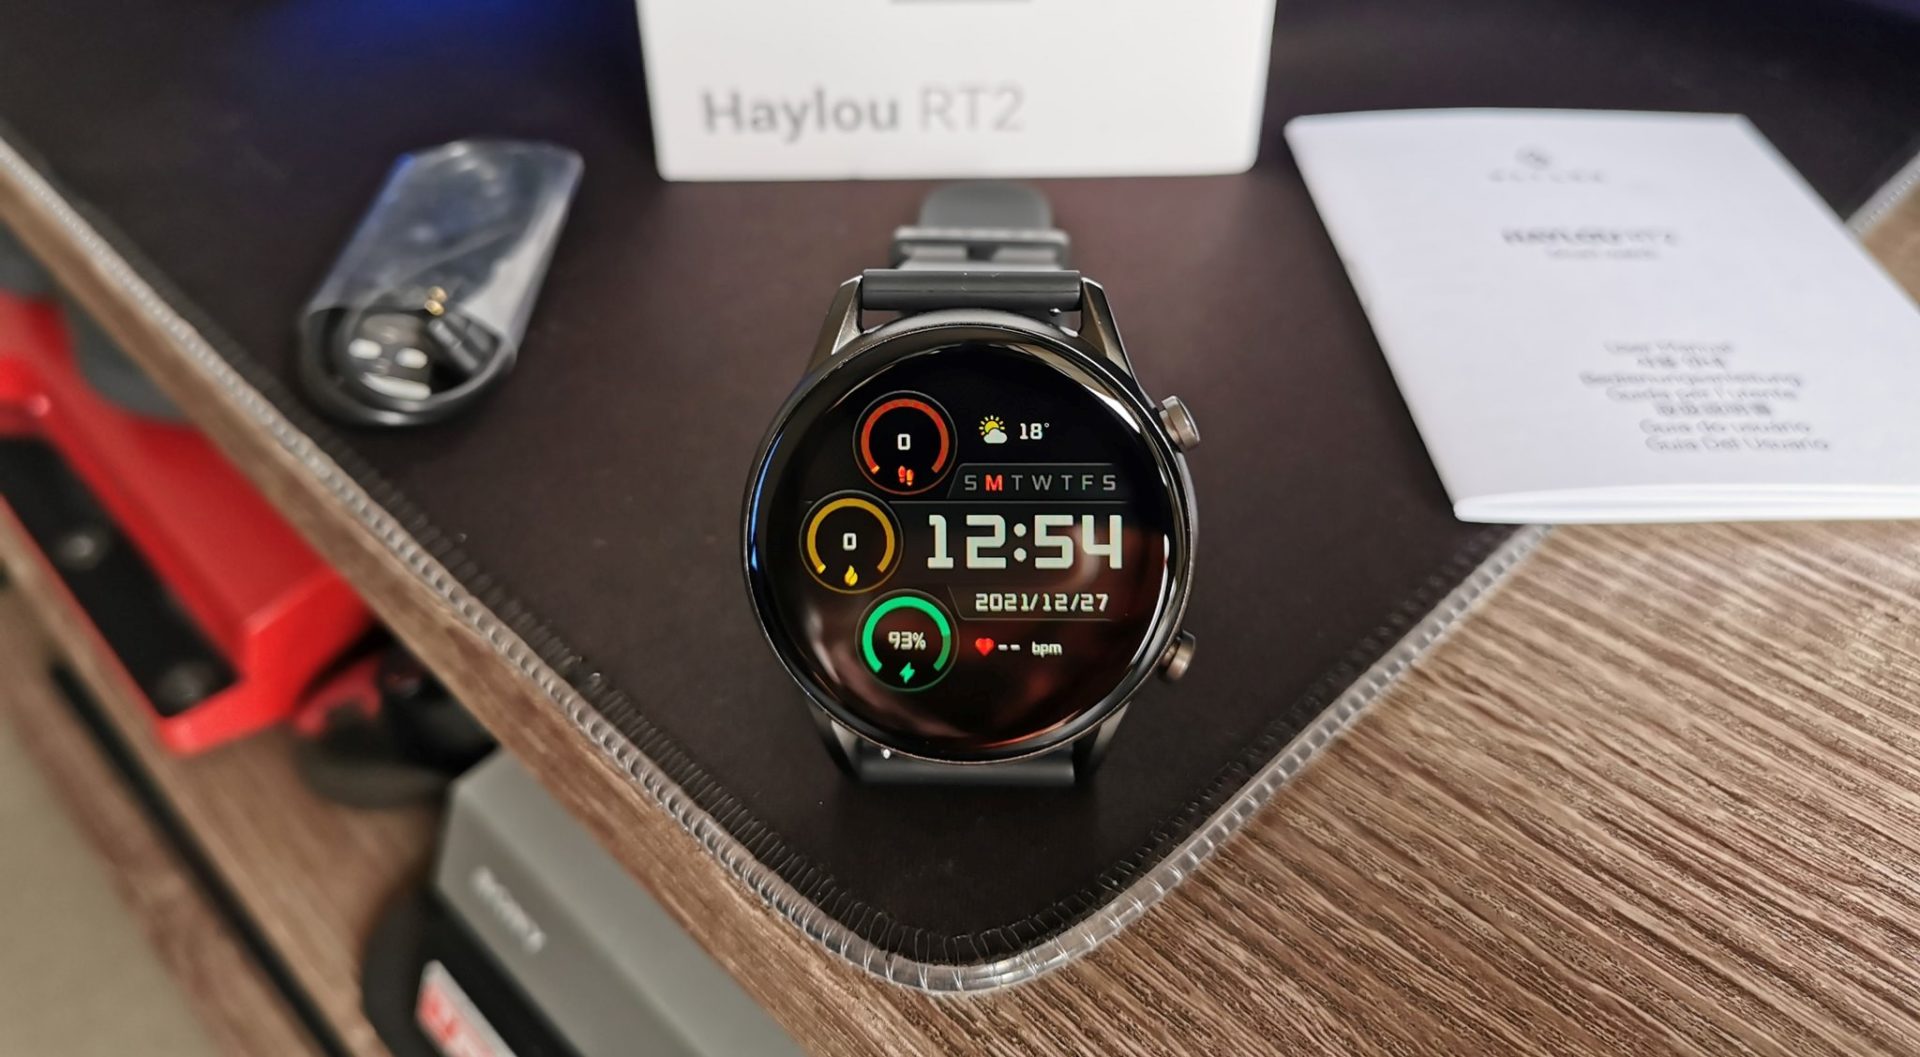 haylou-rt2-review